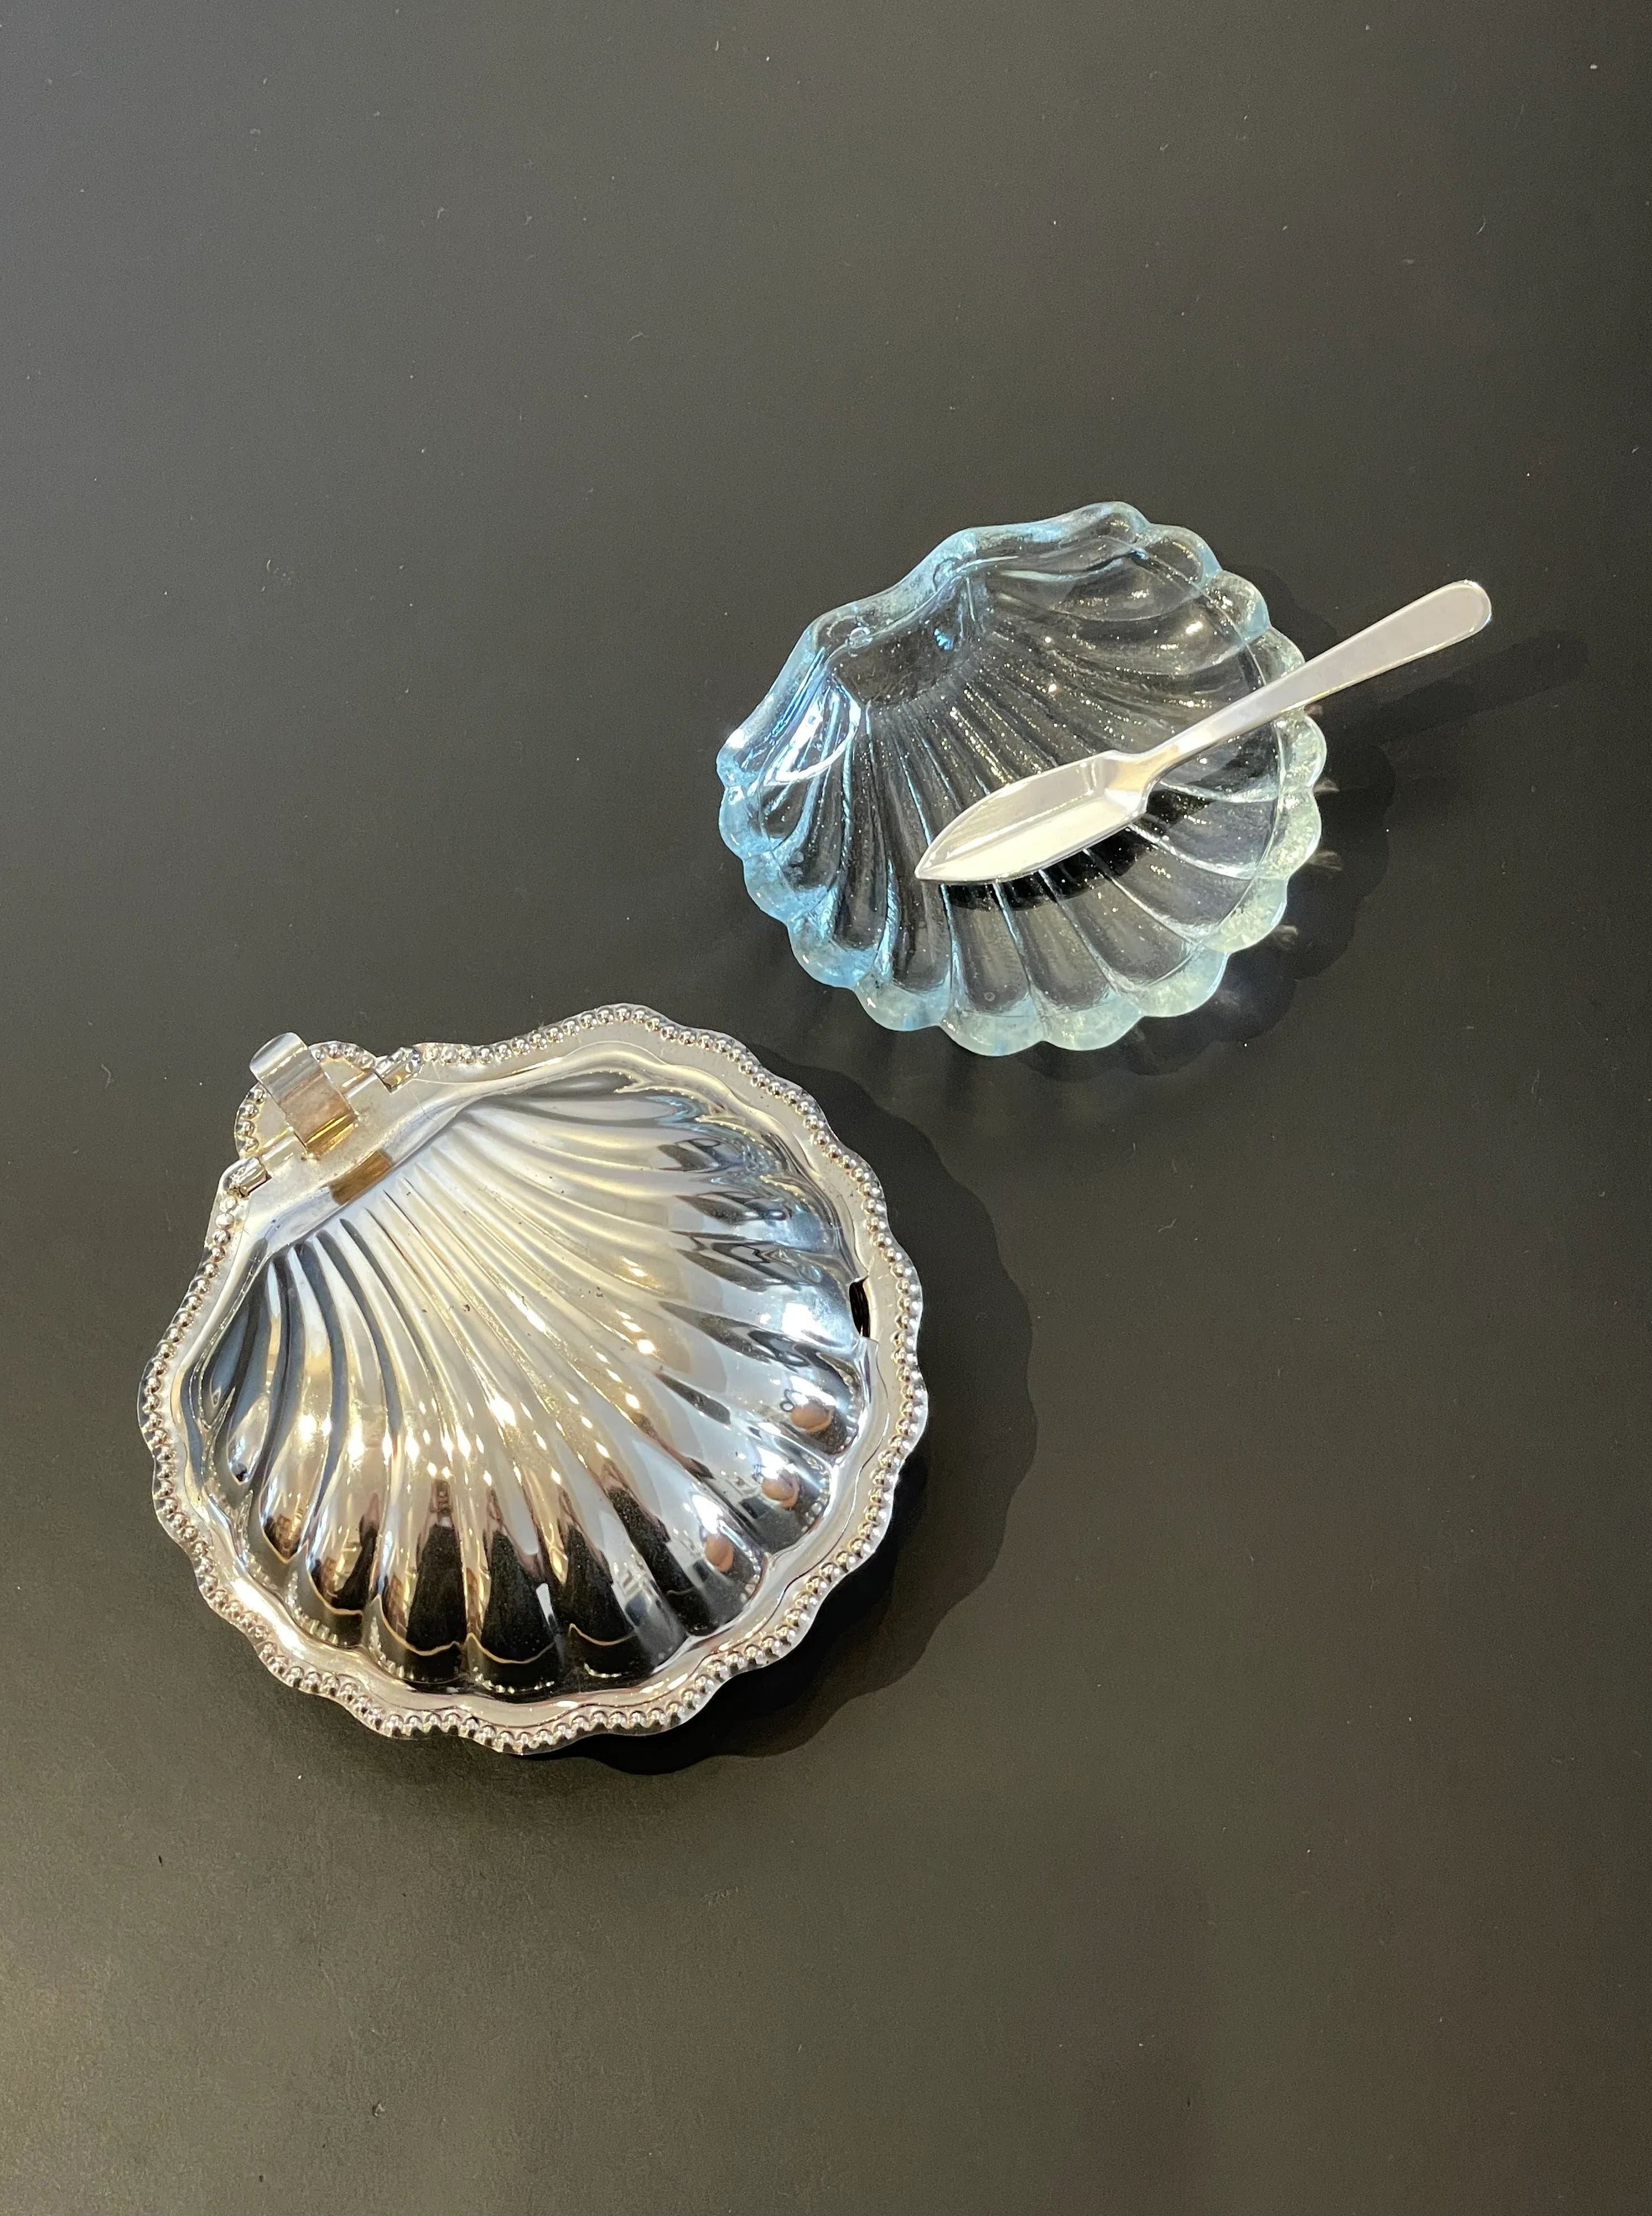  Beautiful and functional butter holder in the shape of a delicate shell